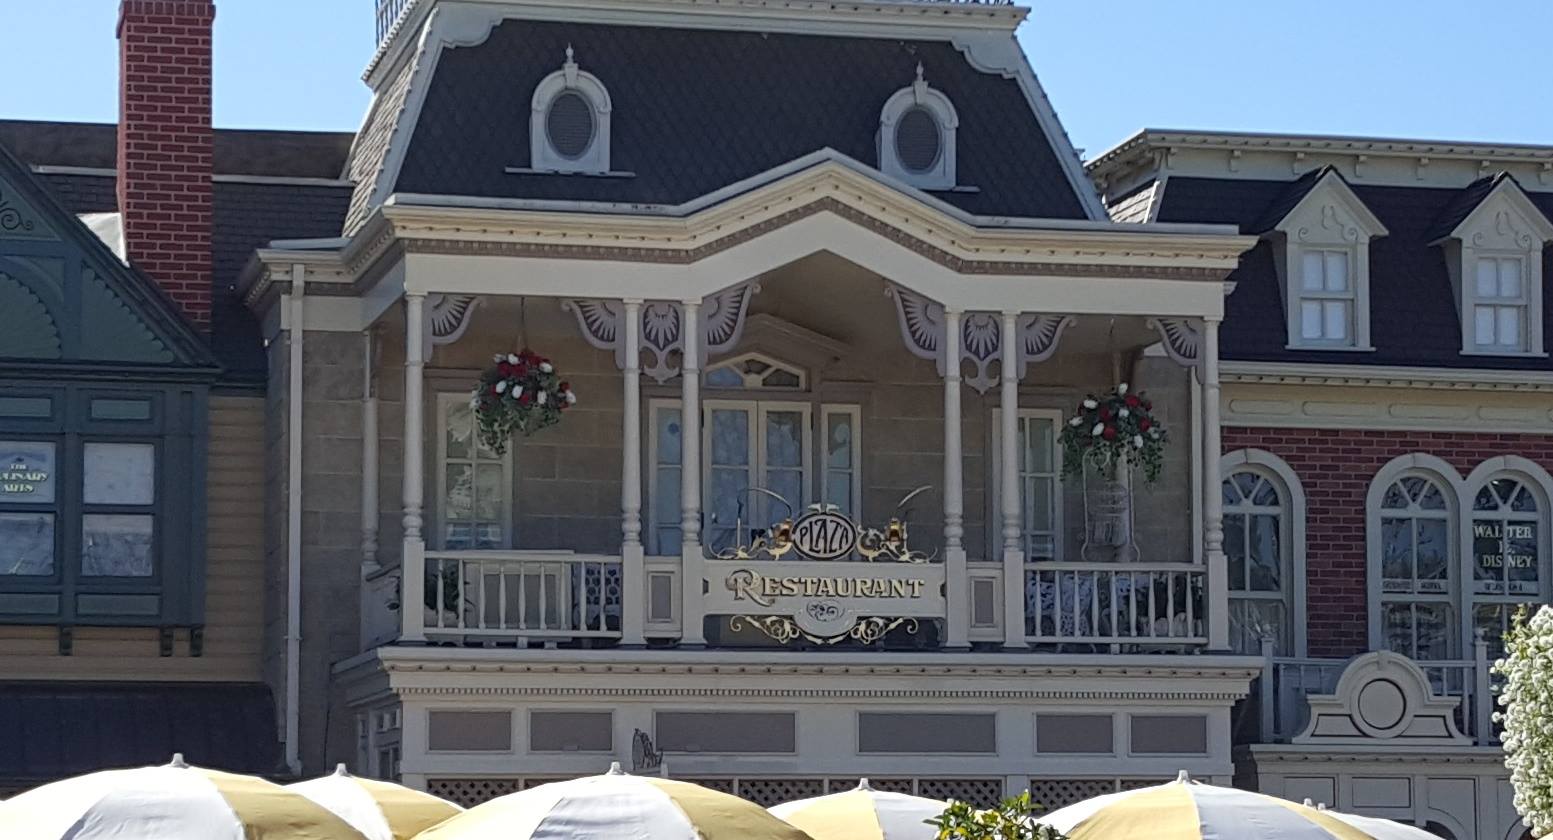 Plaza Restaurant at Magic Kingdom changing its Reservation Policy